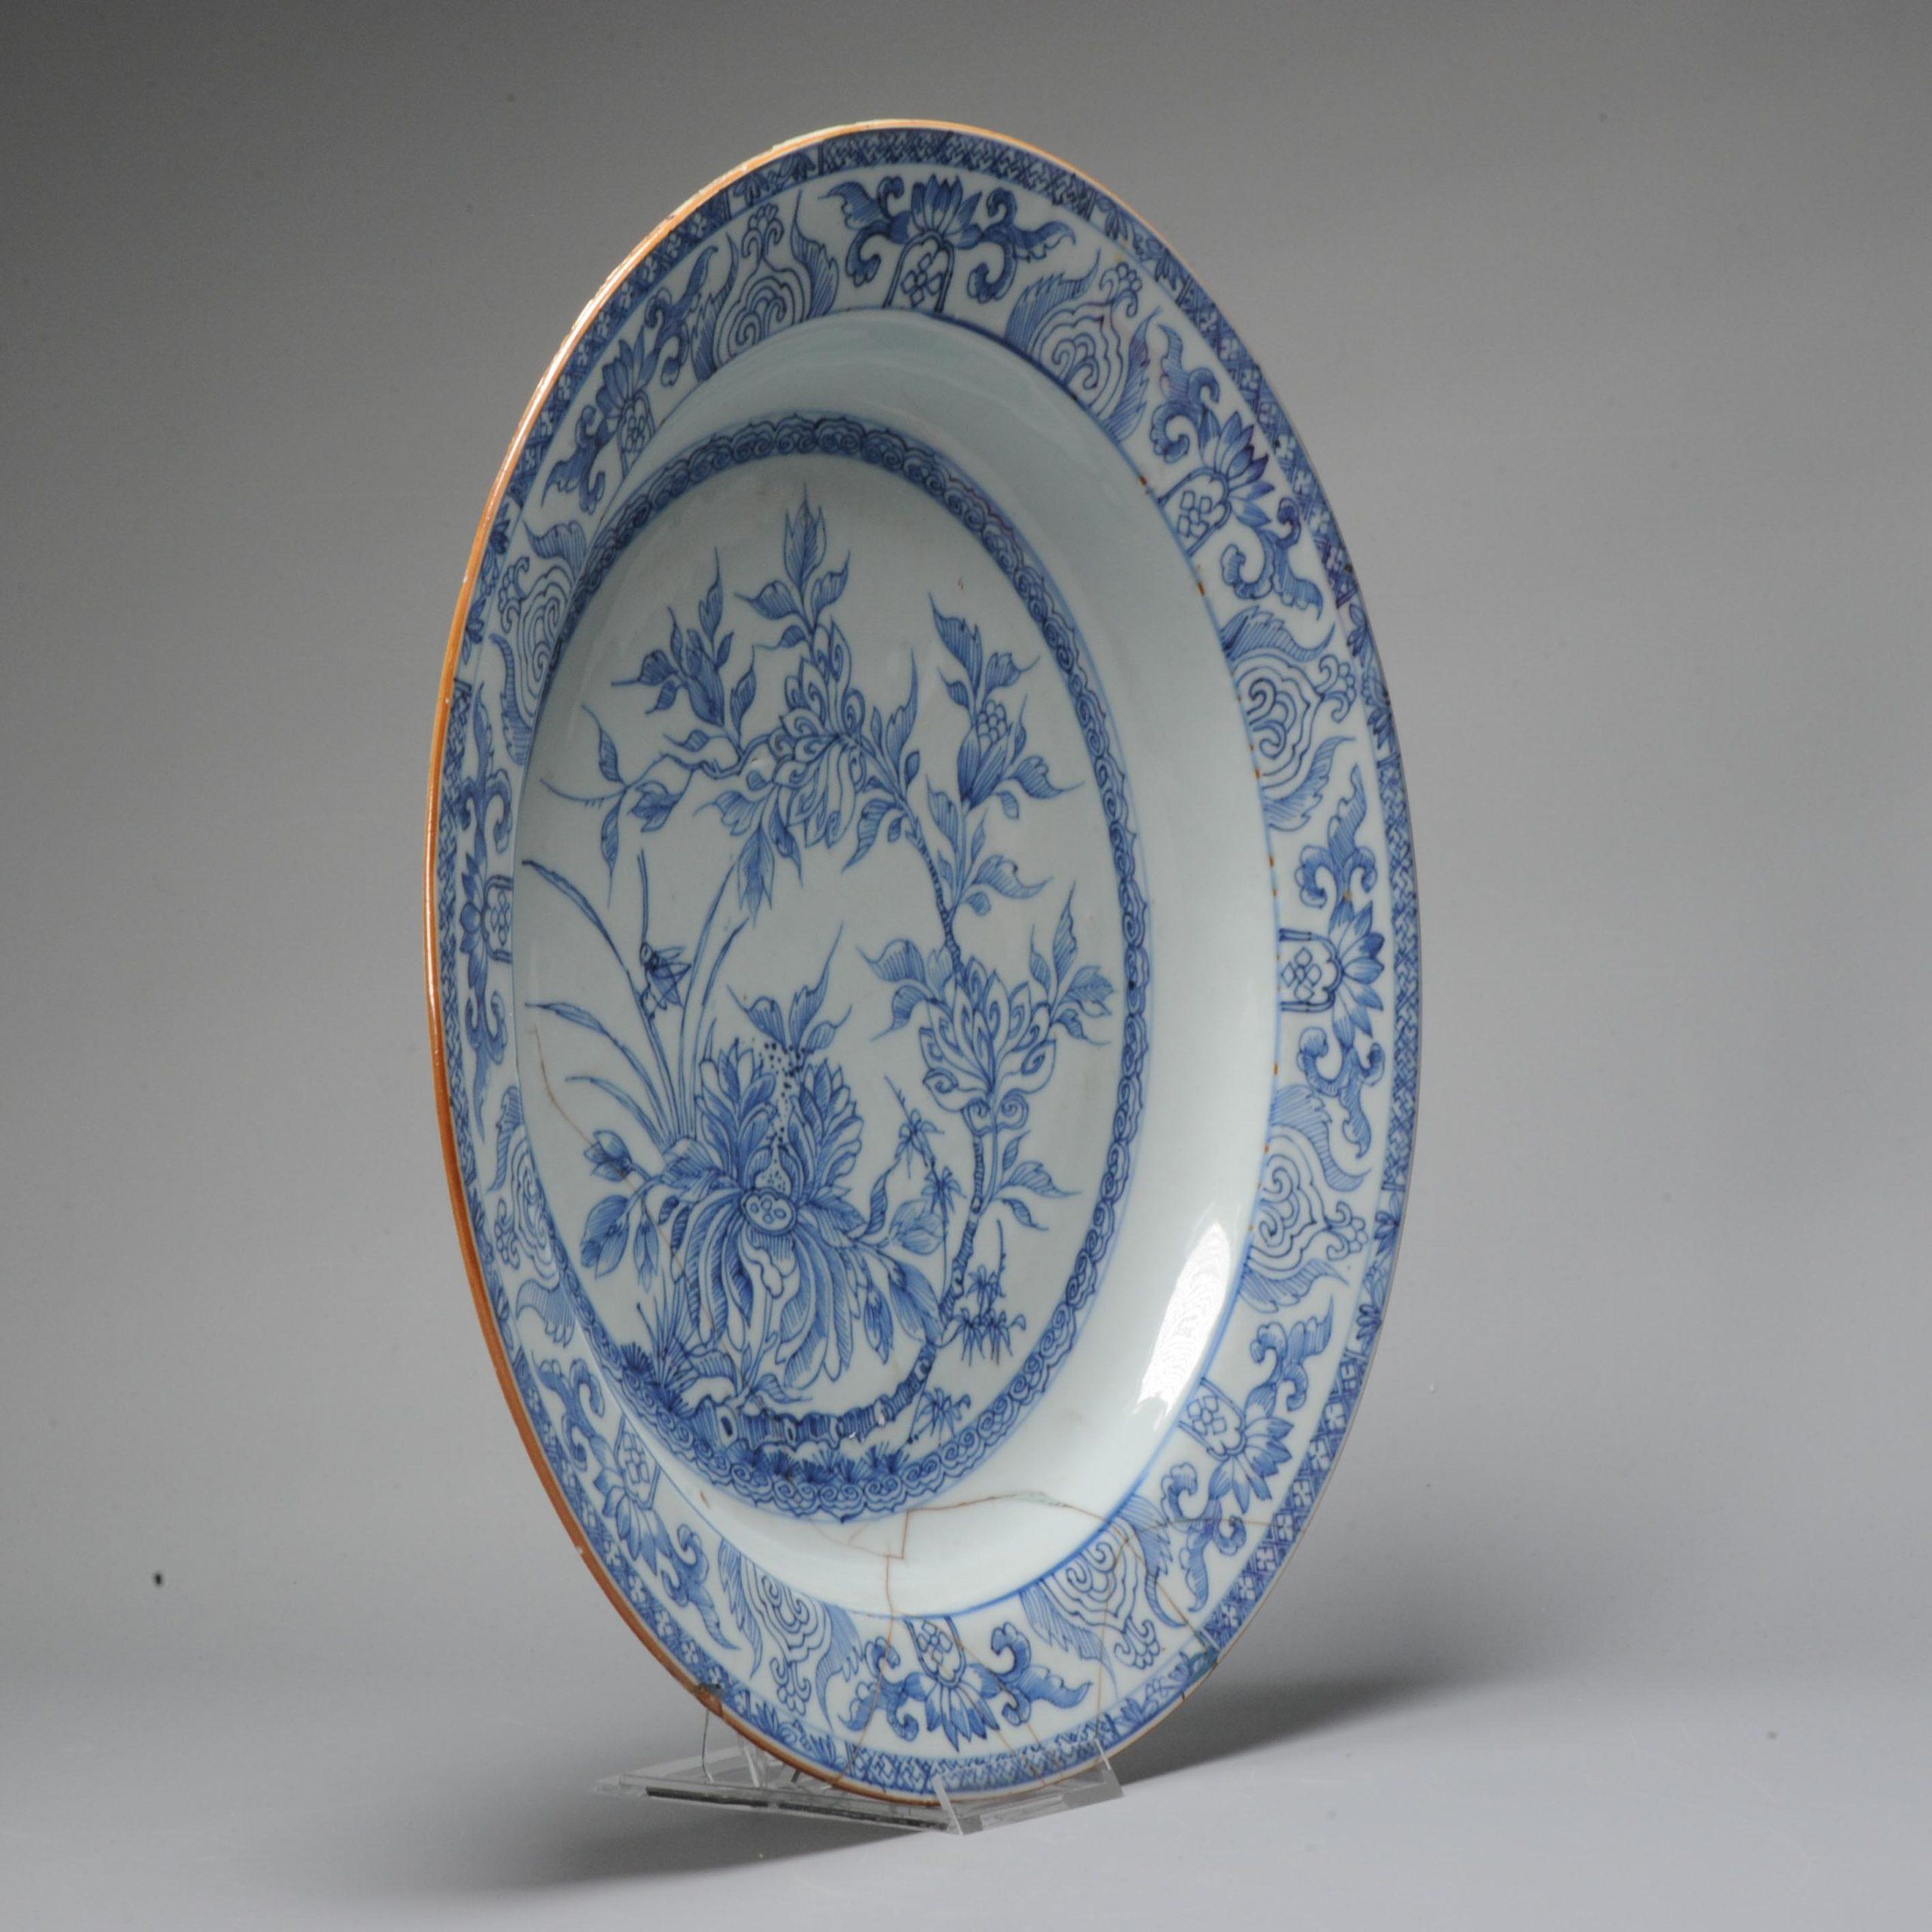 A highly unusual and high quality Charger from the 18th century, yongzheng period. Very thinly potted. With a lovely scene of flowers, grashoppers and geometric design.

Additional information:
Material: Porcelain & Pottery
Color: Blue &